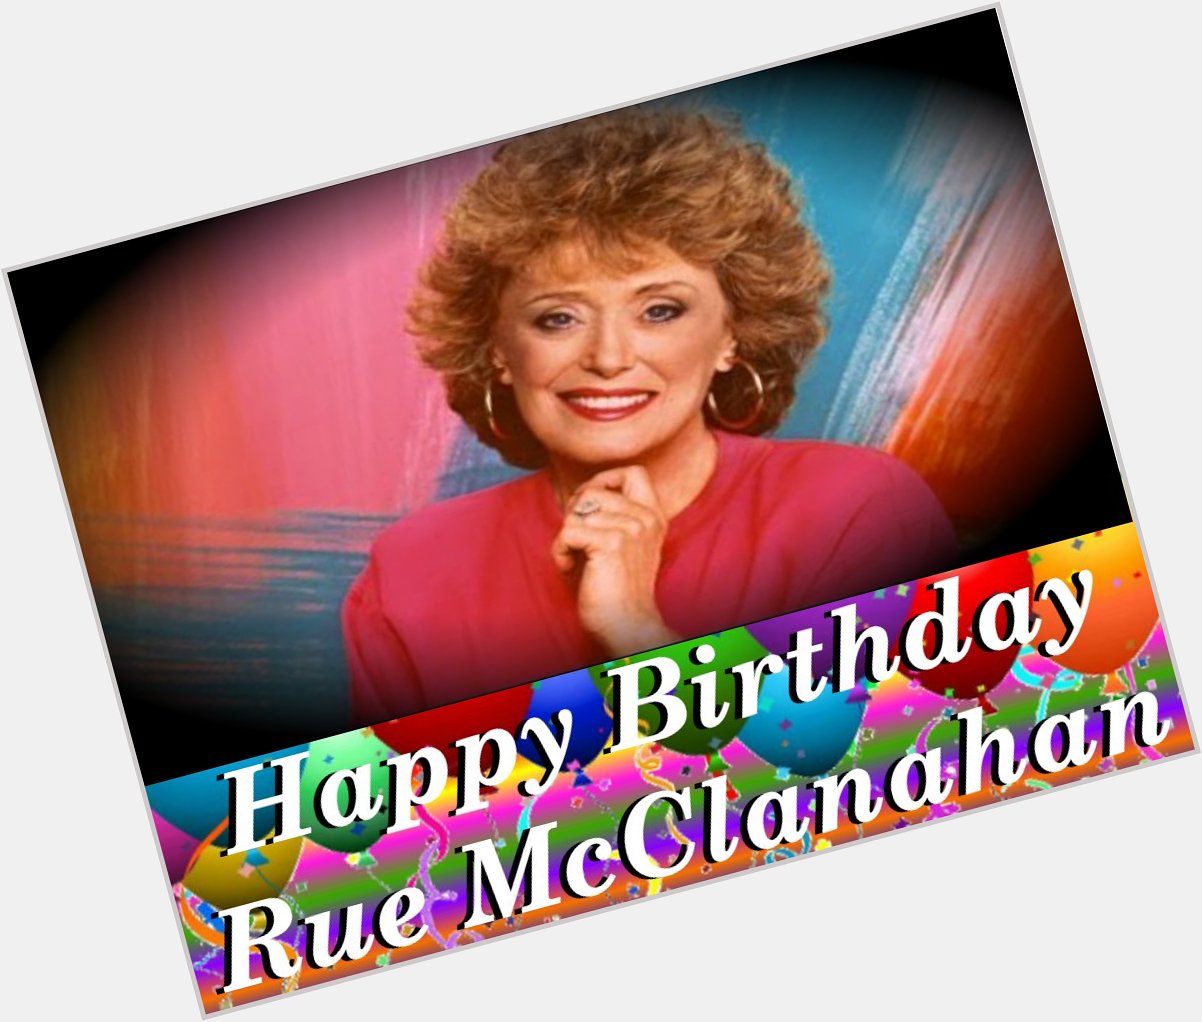 Happy birthday to one of the sassiest actress, Rue McClanahan!   She would have been 84 today. 